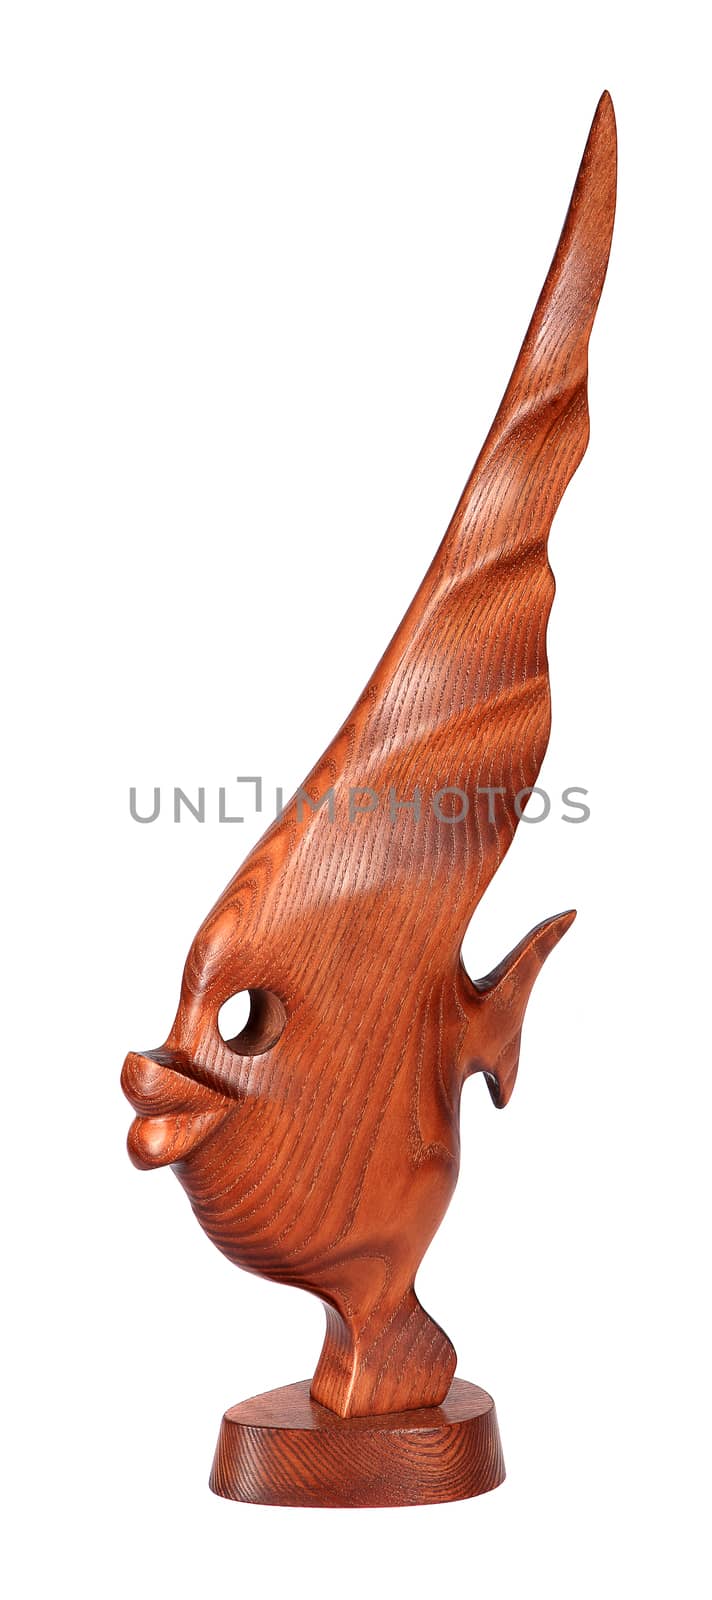 Fish statuette isolated on white background (souvenir)
